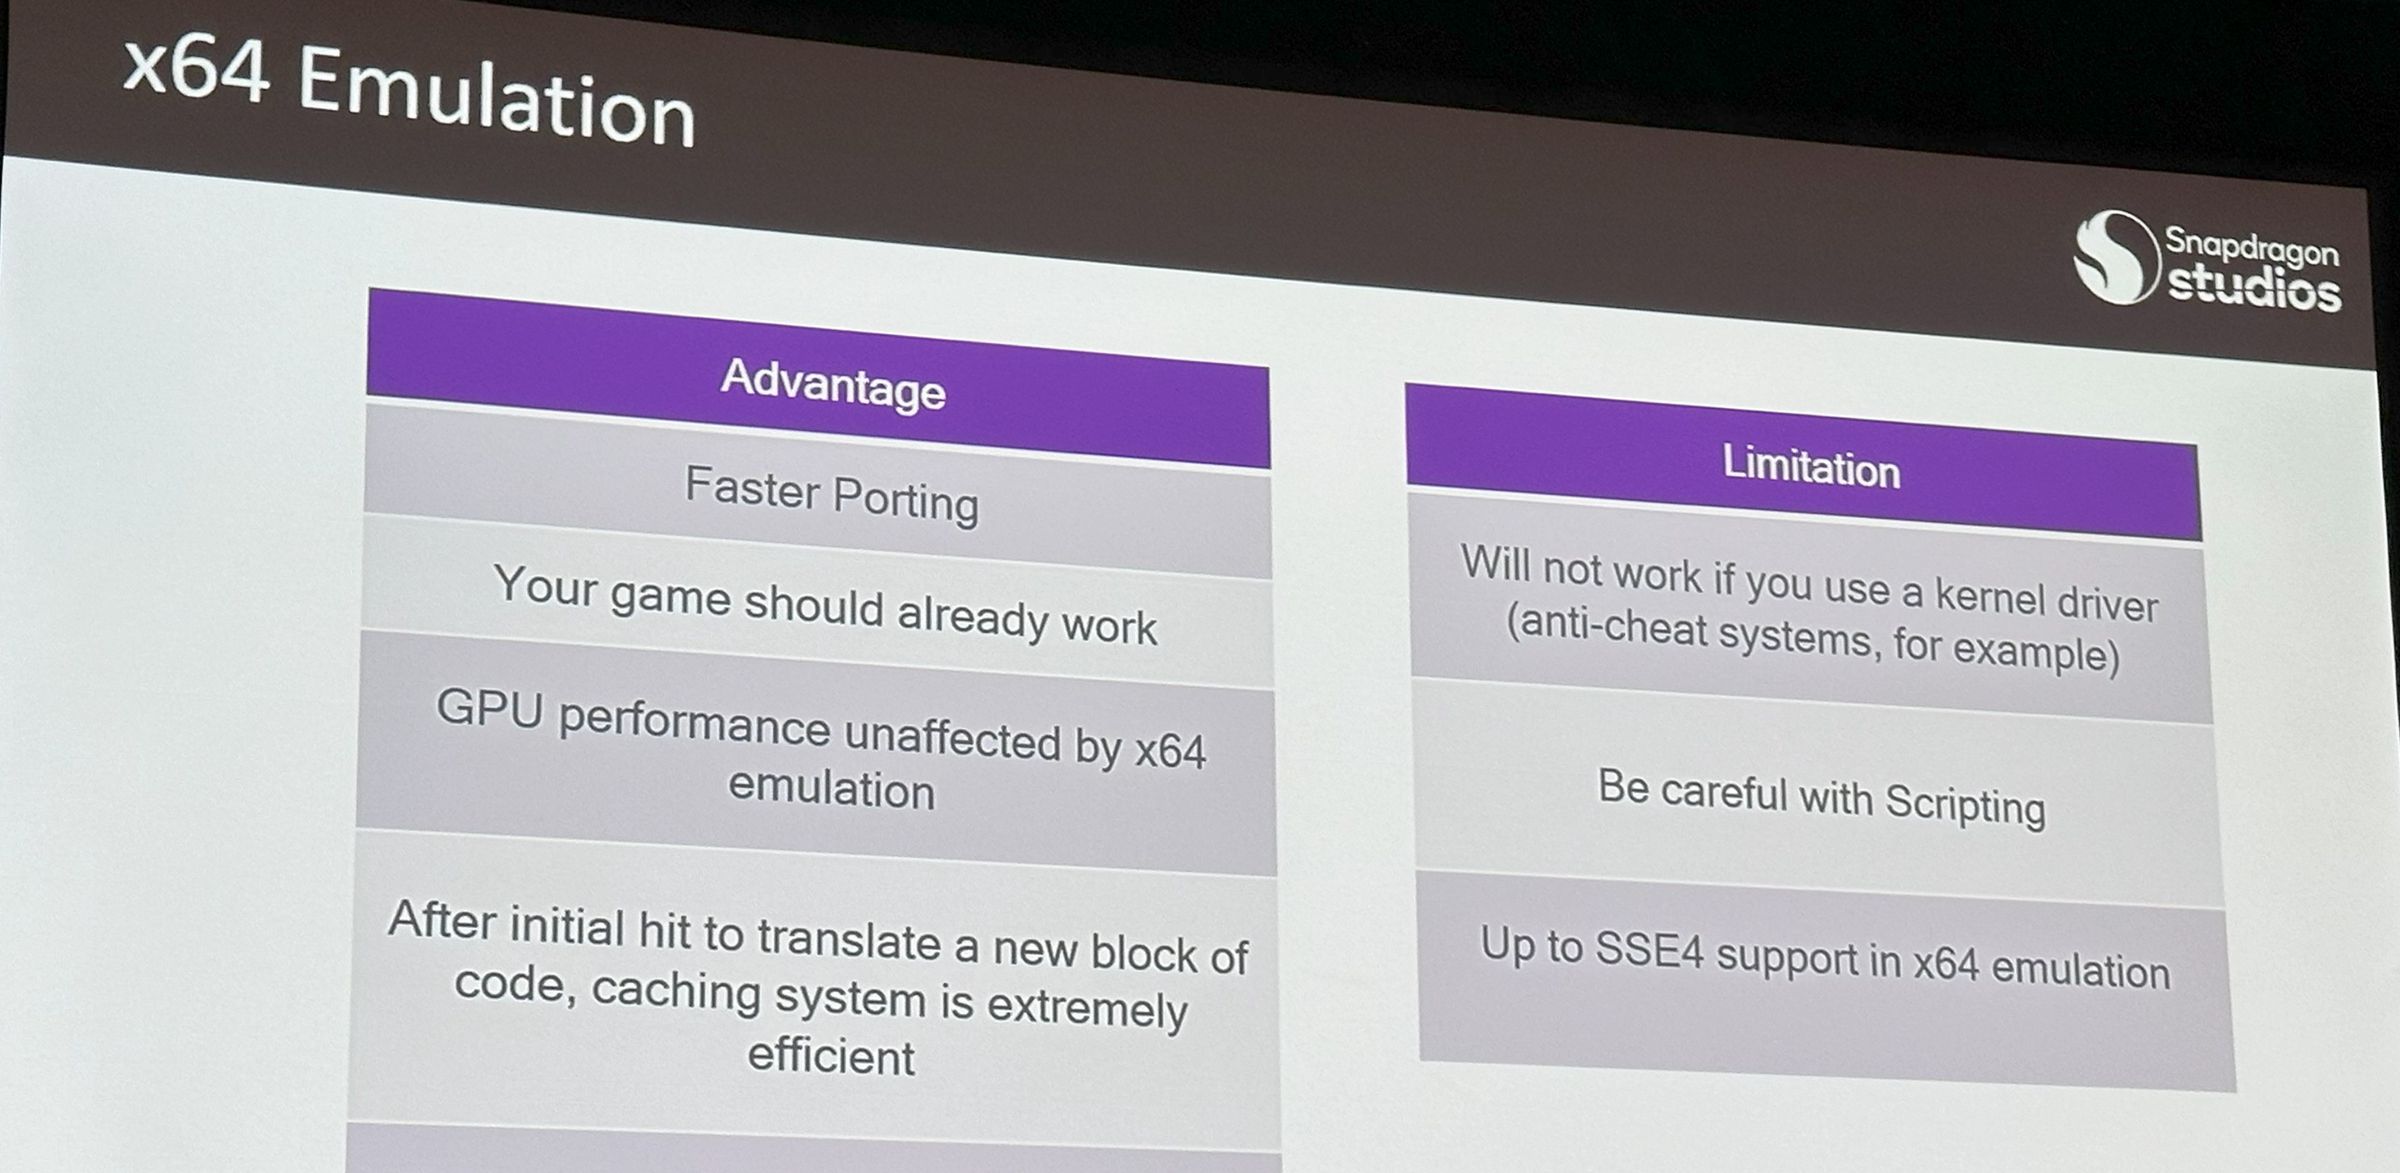 “Your game should already work,” writes Qualcomm.